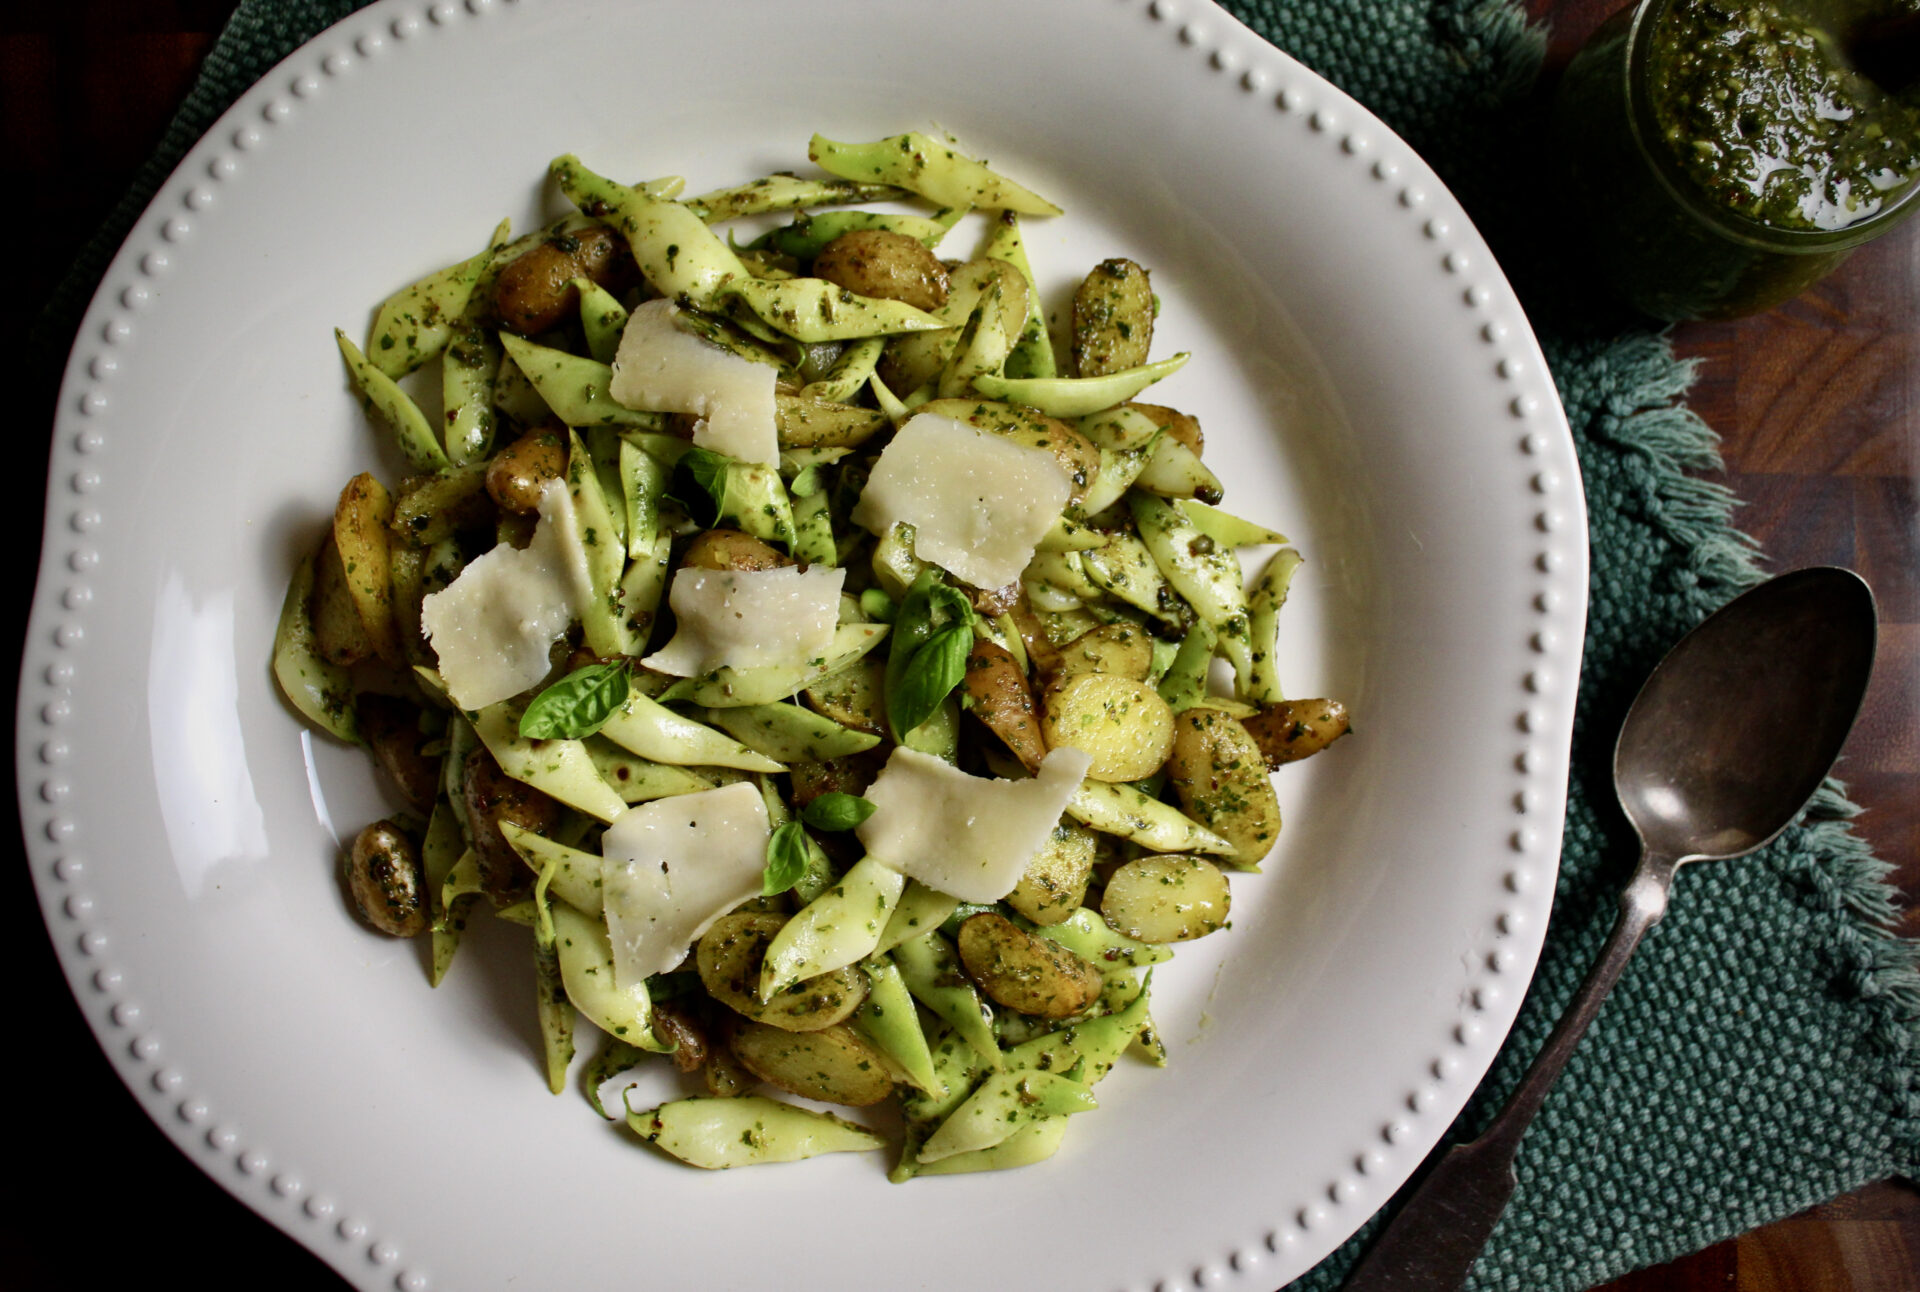 Pesto Potatoes & Beans - sautéed potatoes and beans tossed in a lovely basil pesto. A perfect summer side dish.